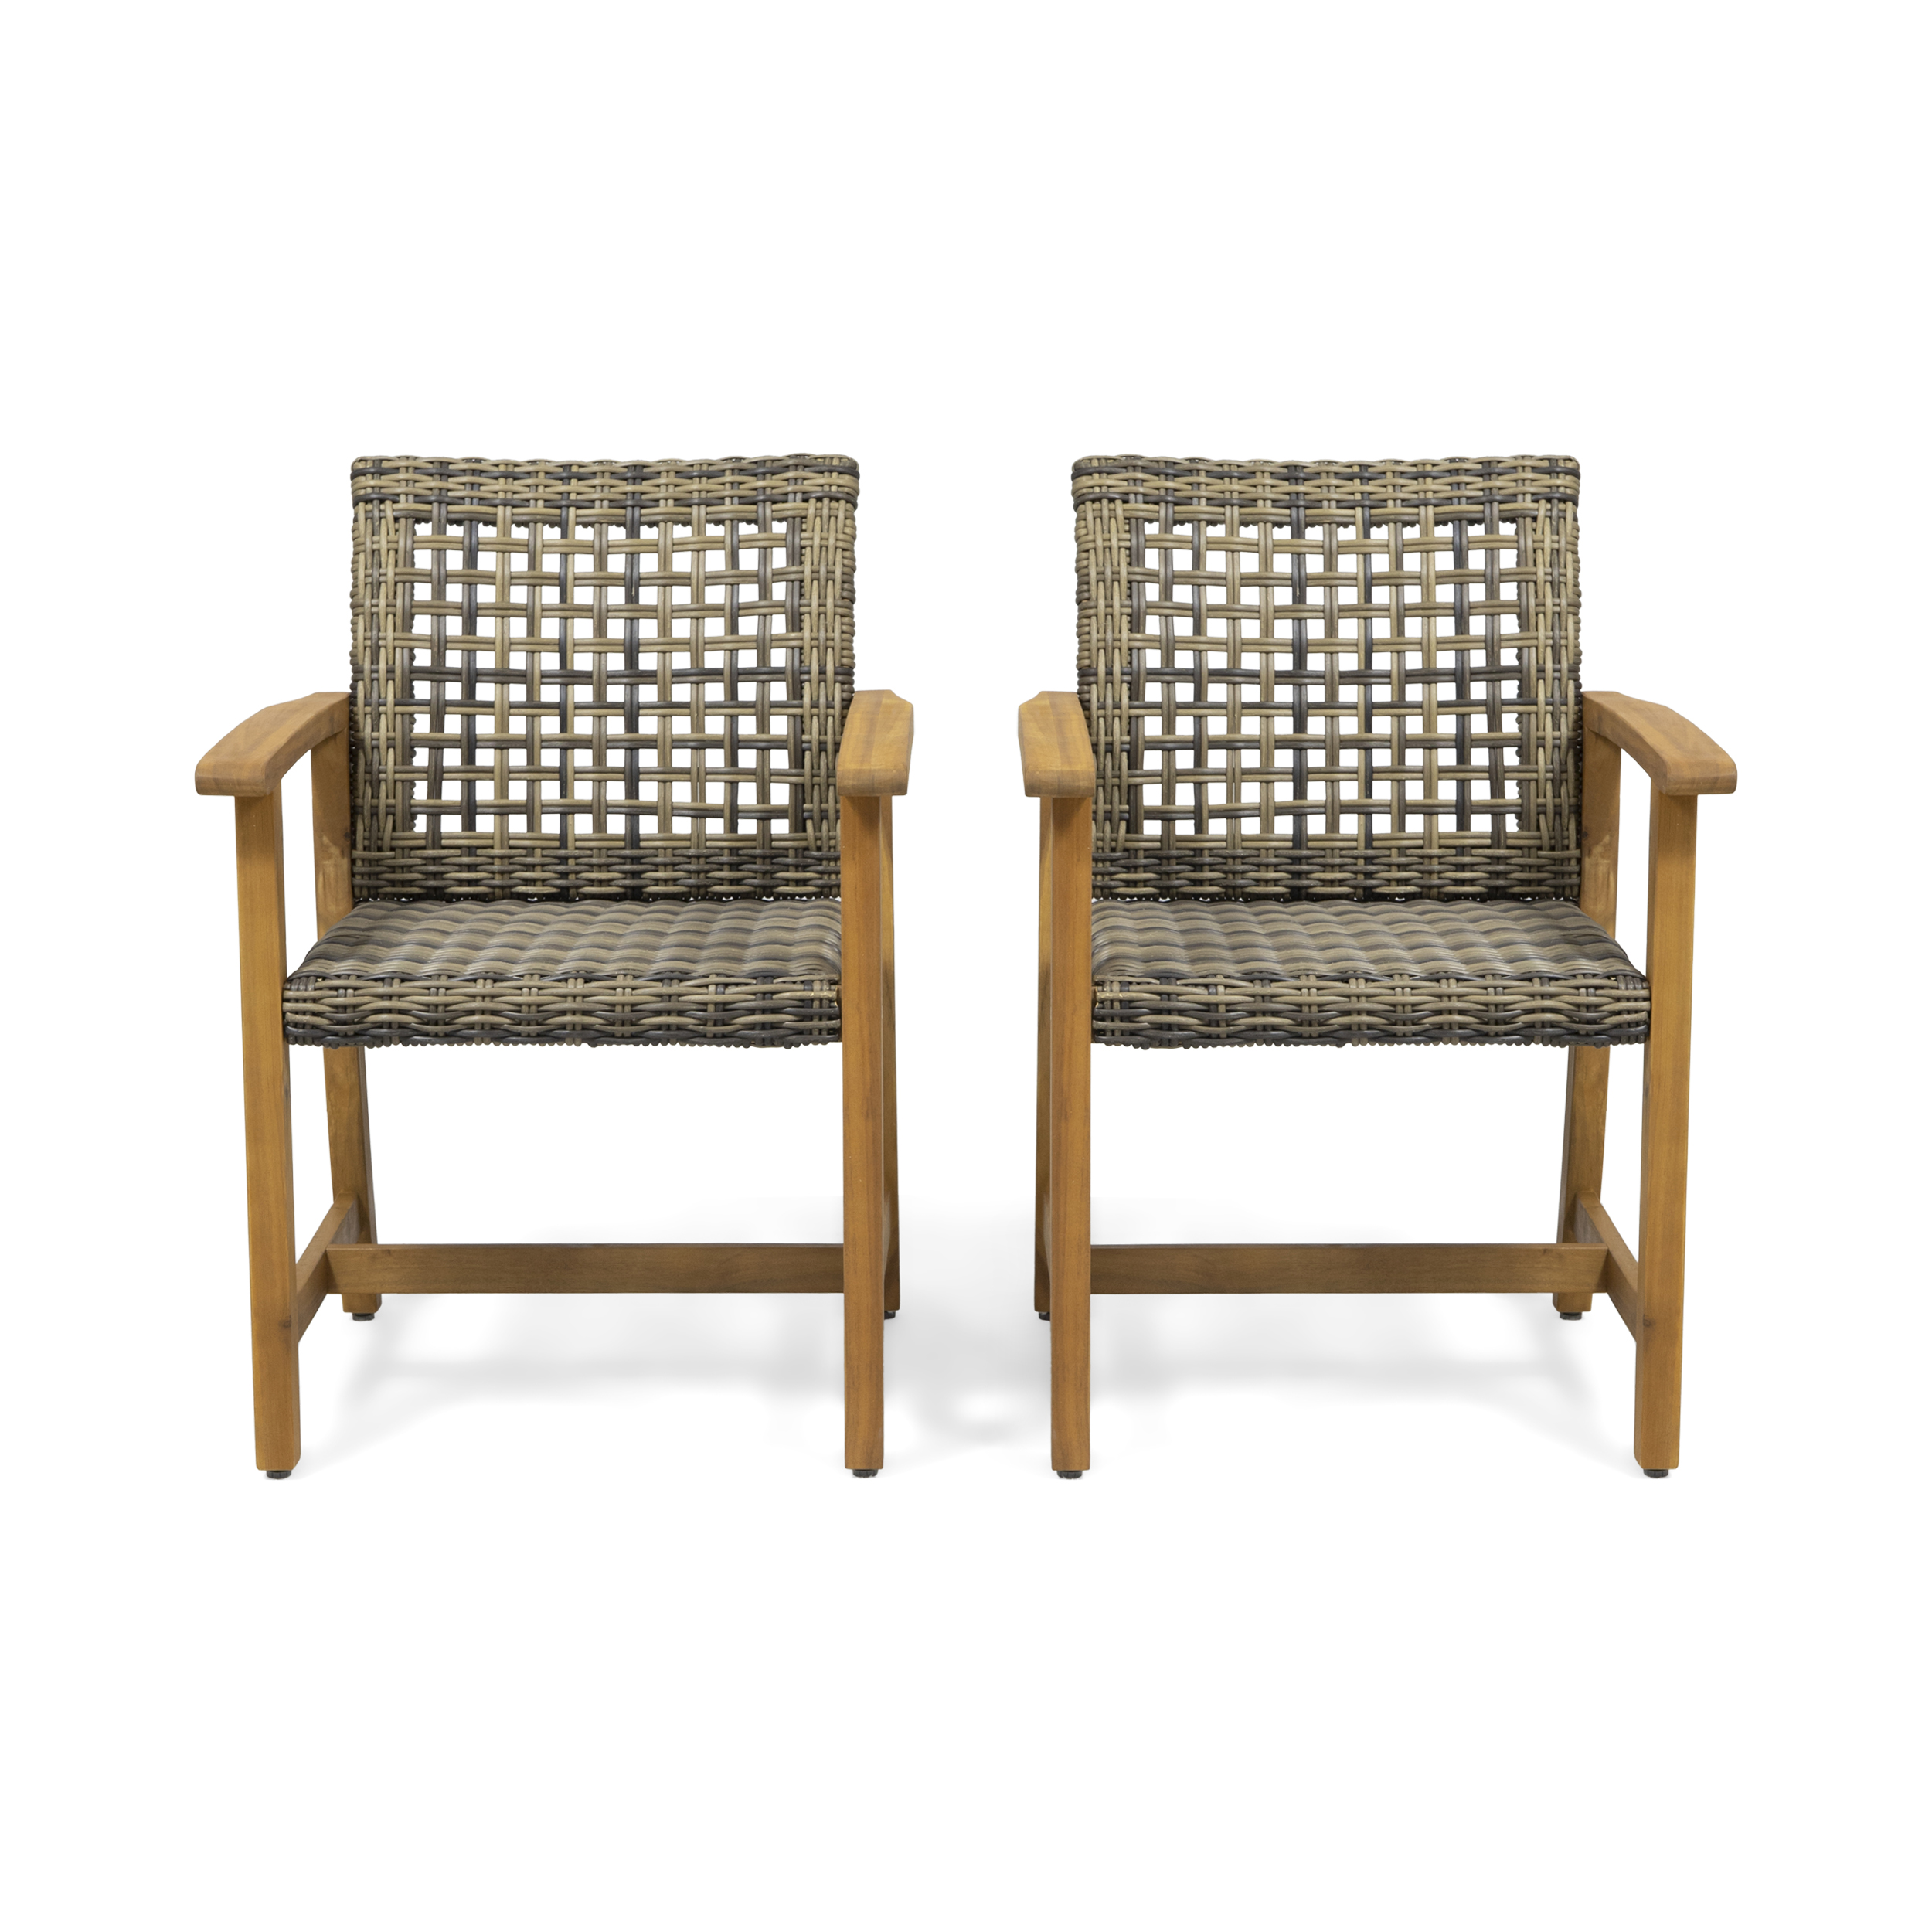 GDF Studio Beacher Outdoor Acacia Wood and Wicker Dining Chair (Set of 2), Natural and Gray - image 1 of 11